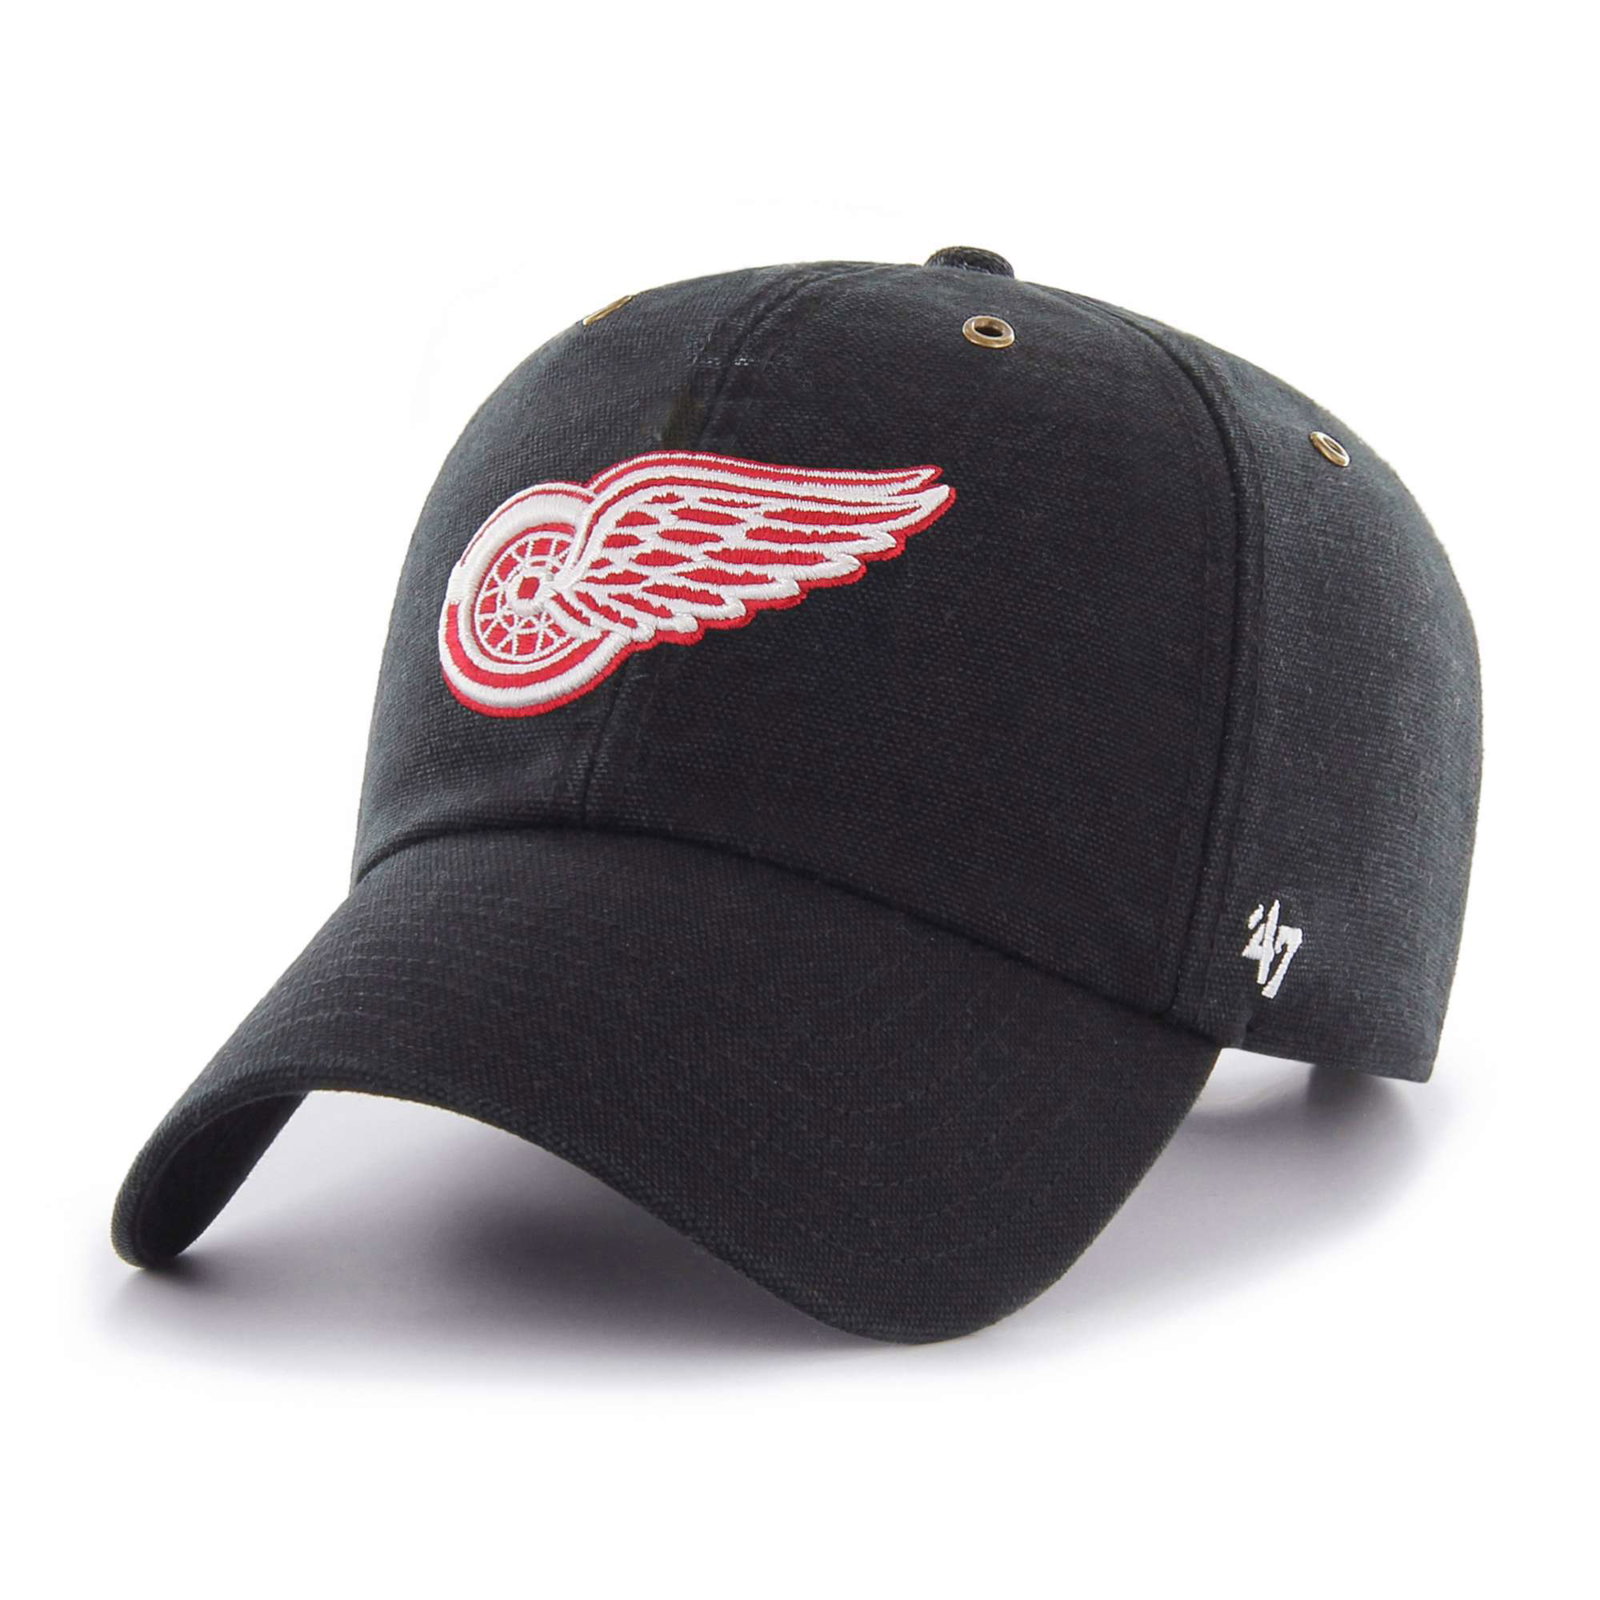 Carhartt: See the hats built to honor hockey’s Original 6 | Milled